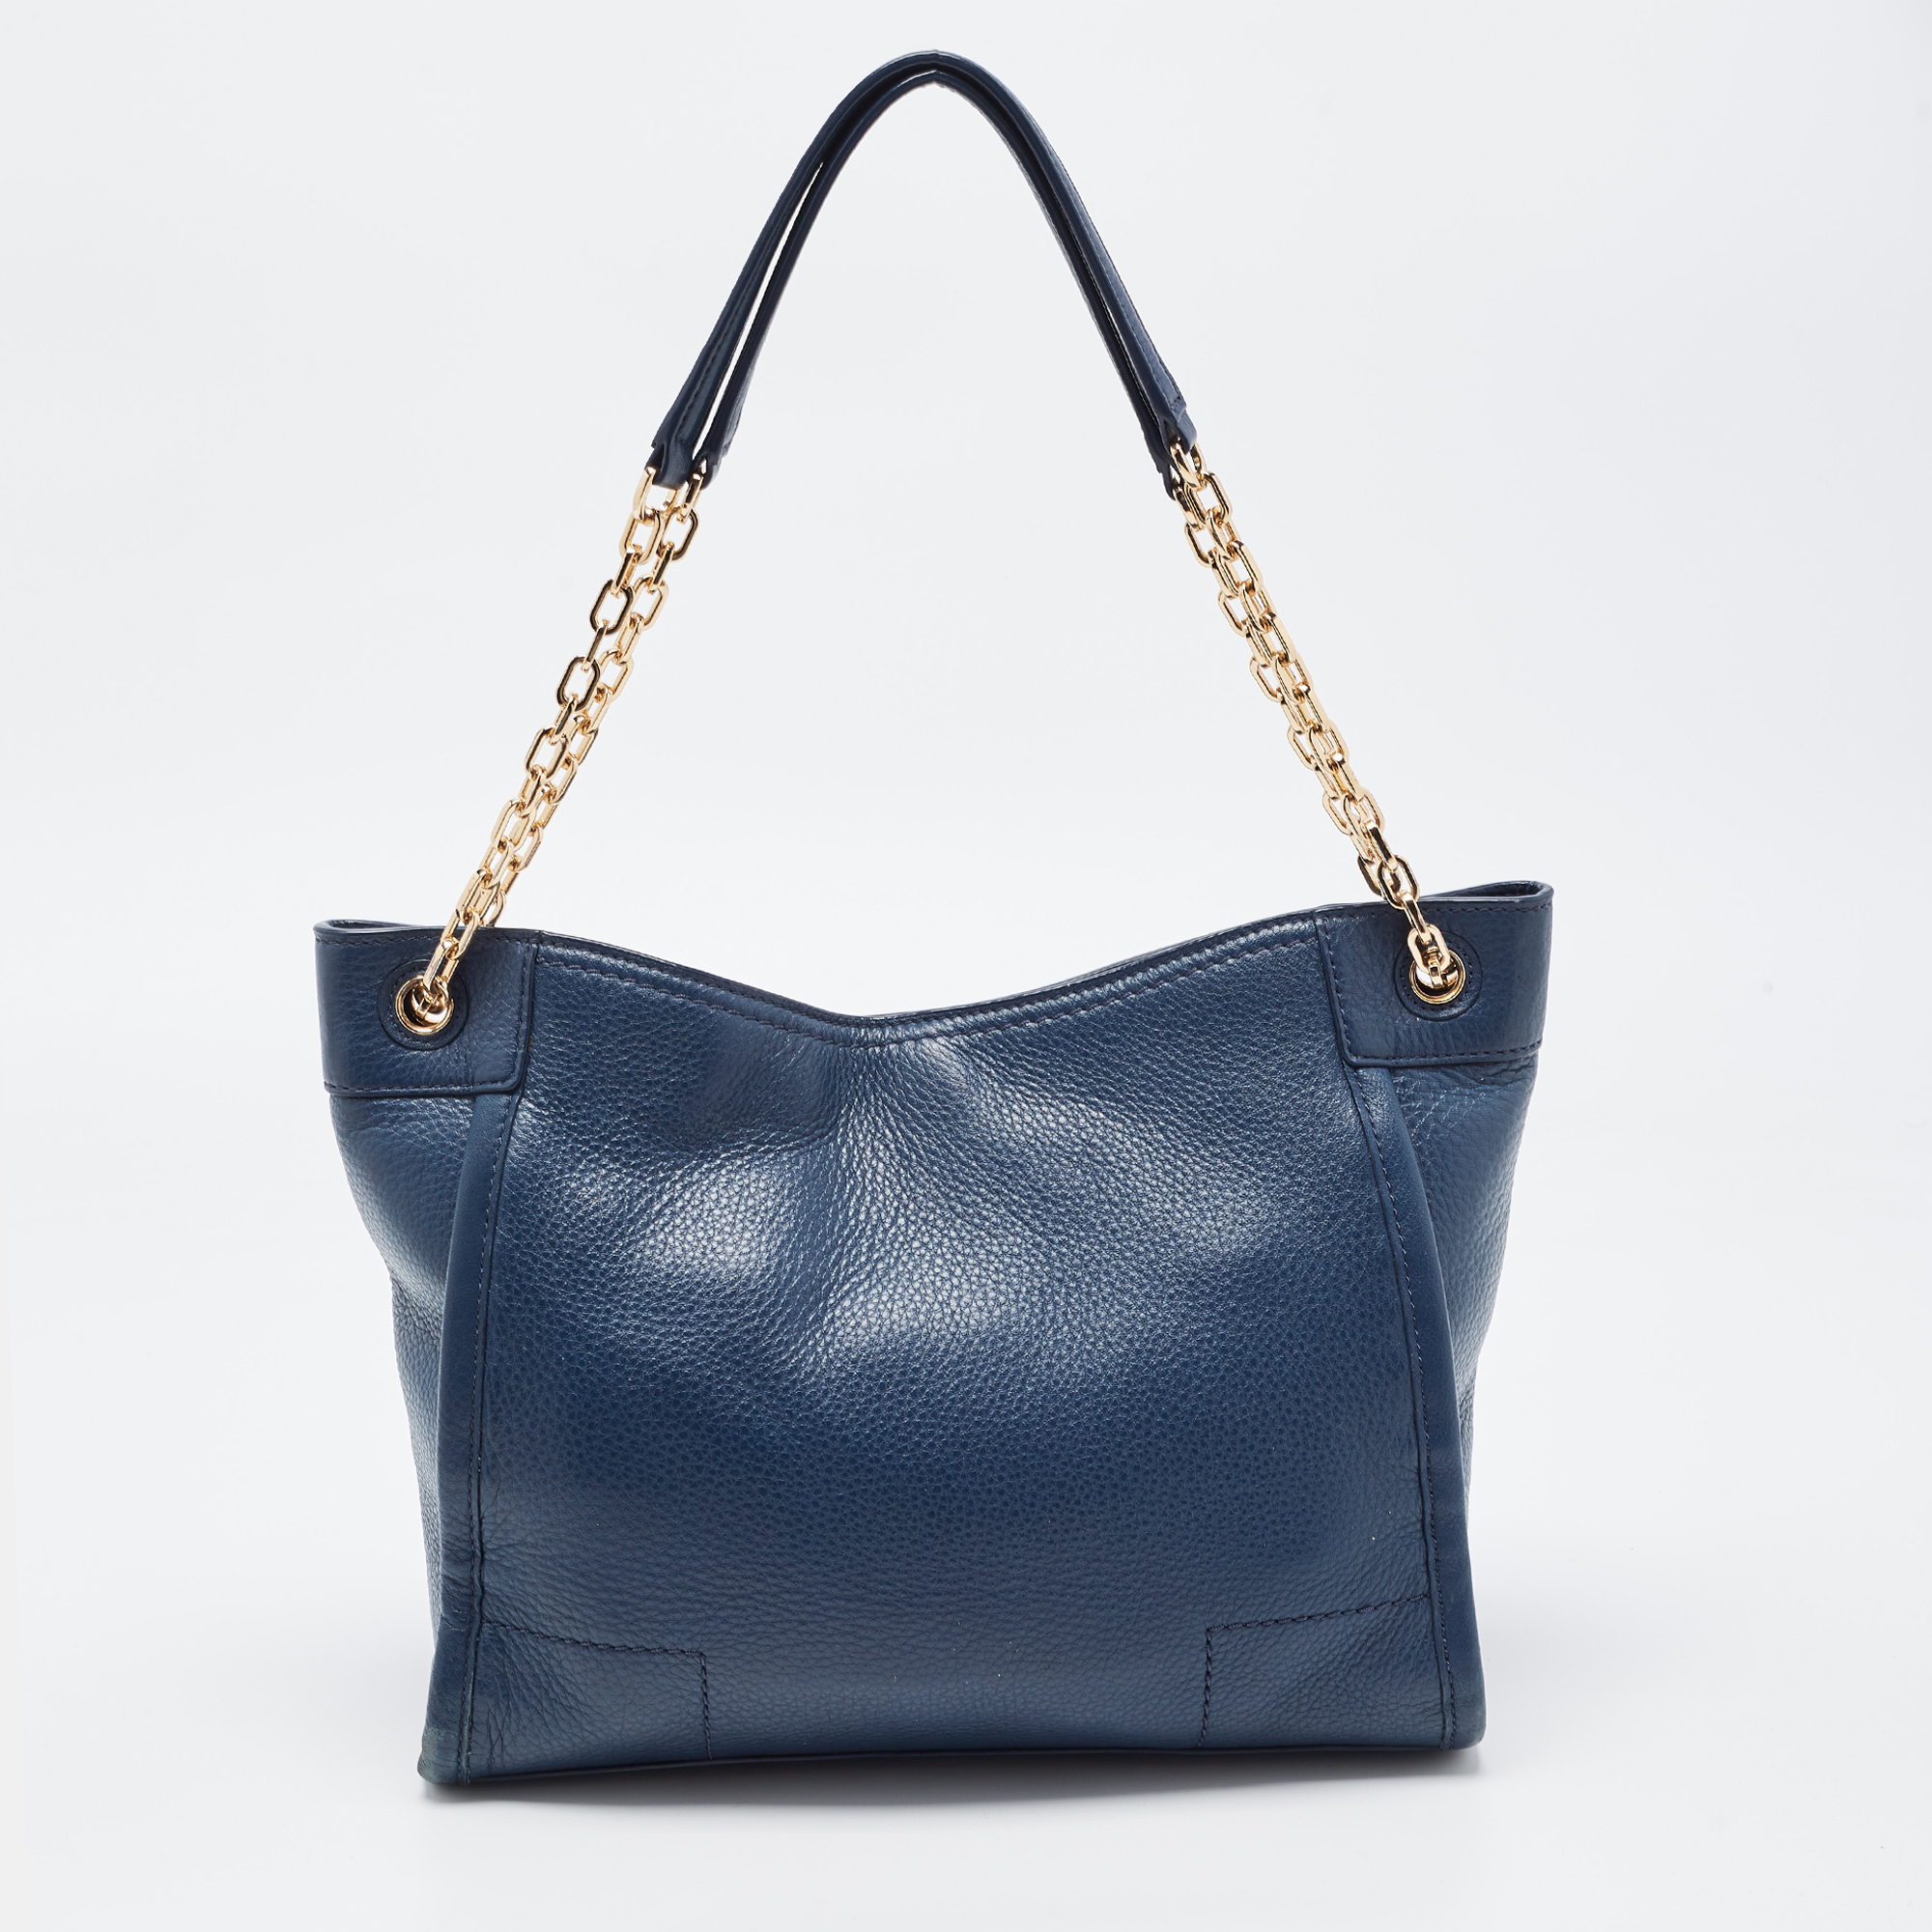 Tory Burch Blue Leather McGraw Slouchy Tote